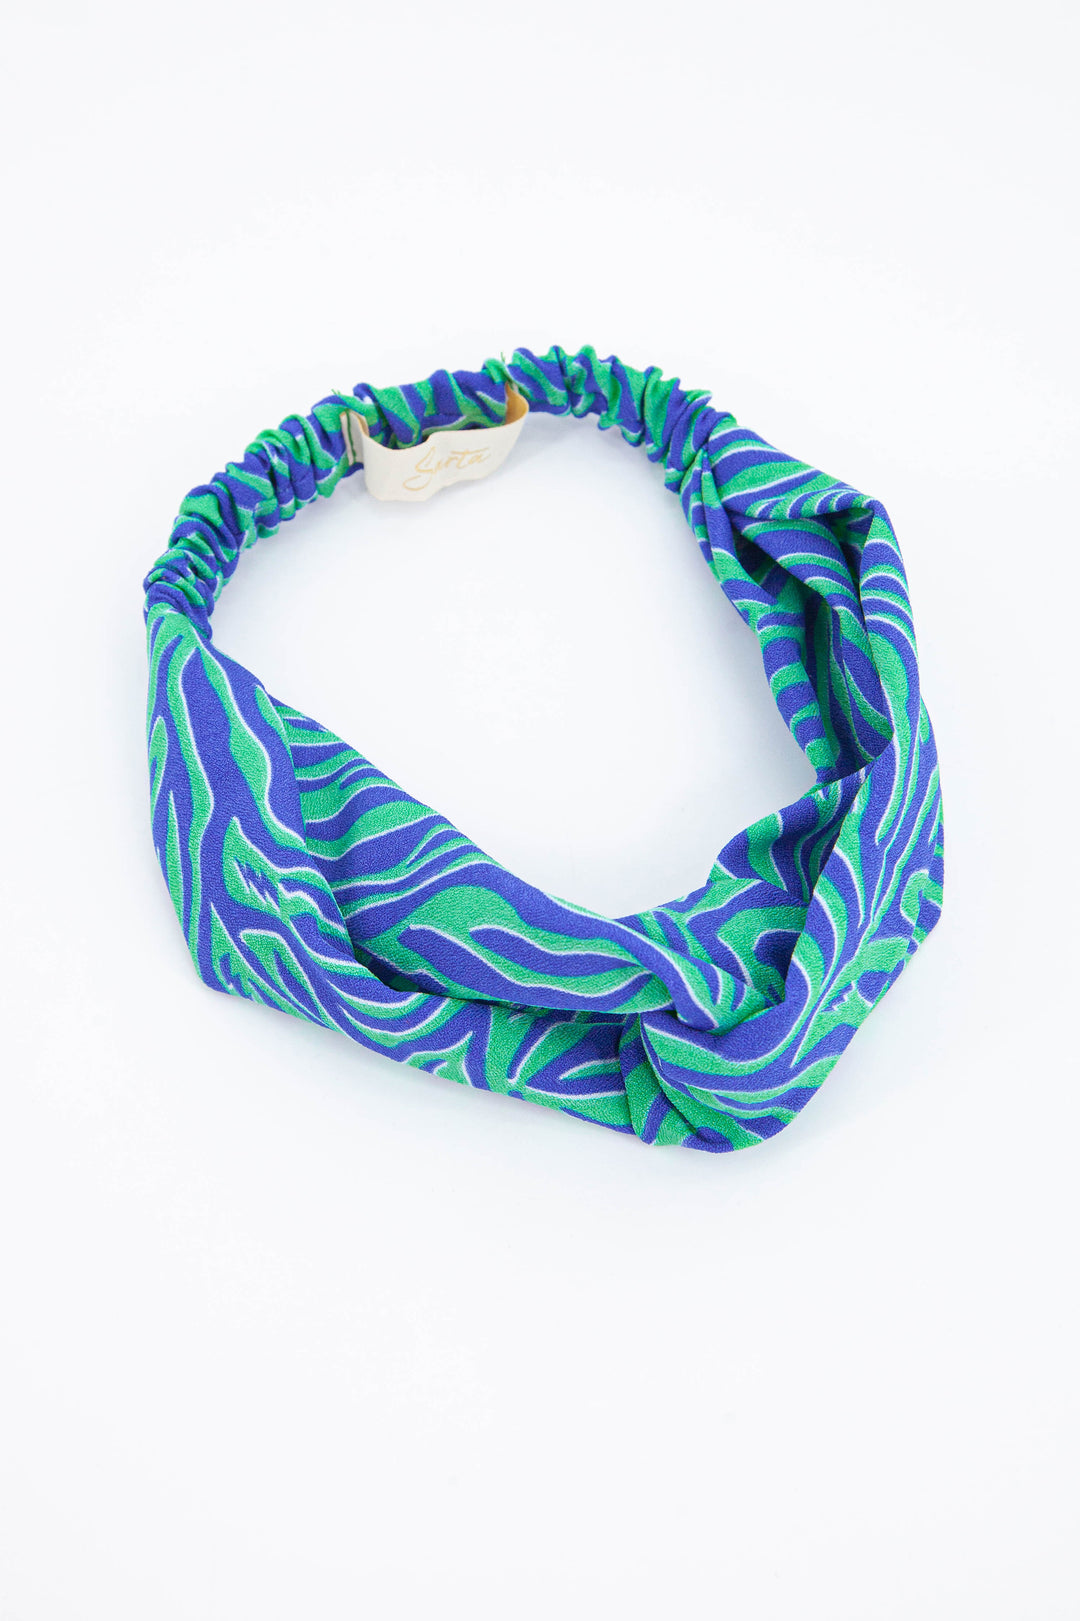 green and blue zebra print fabric head band with twisted front and elasticated back